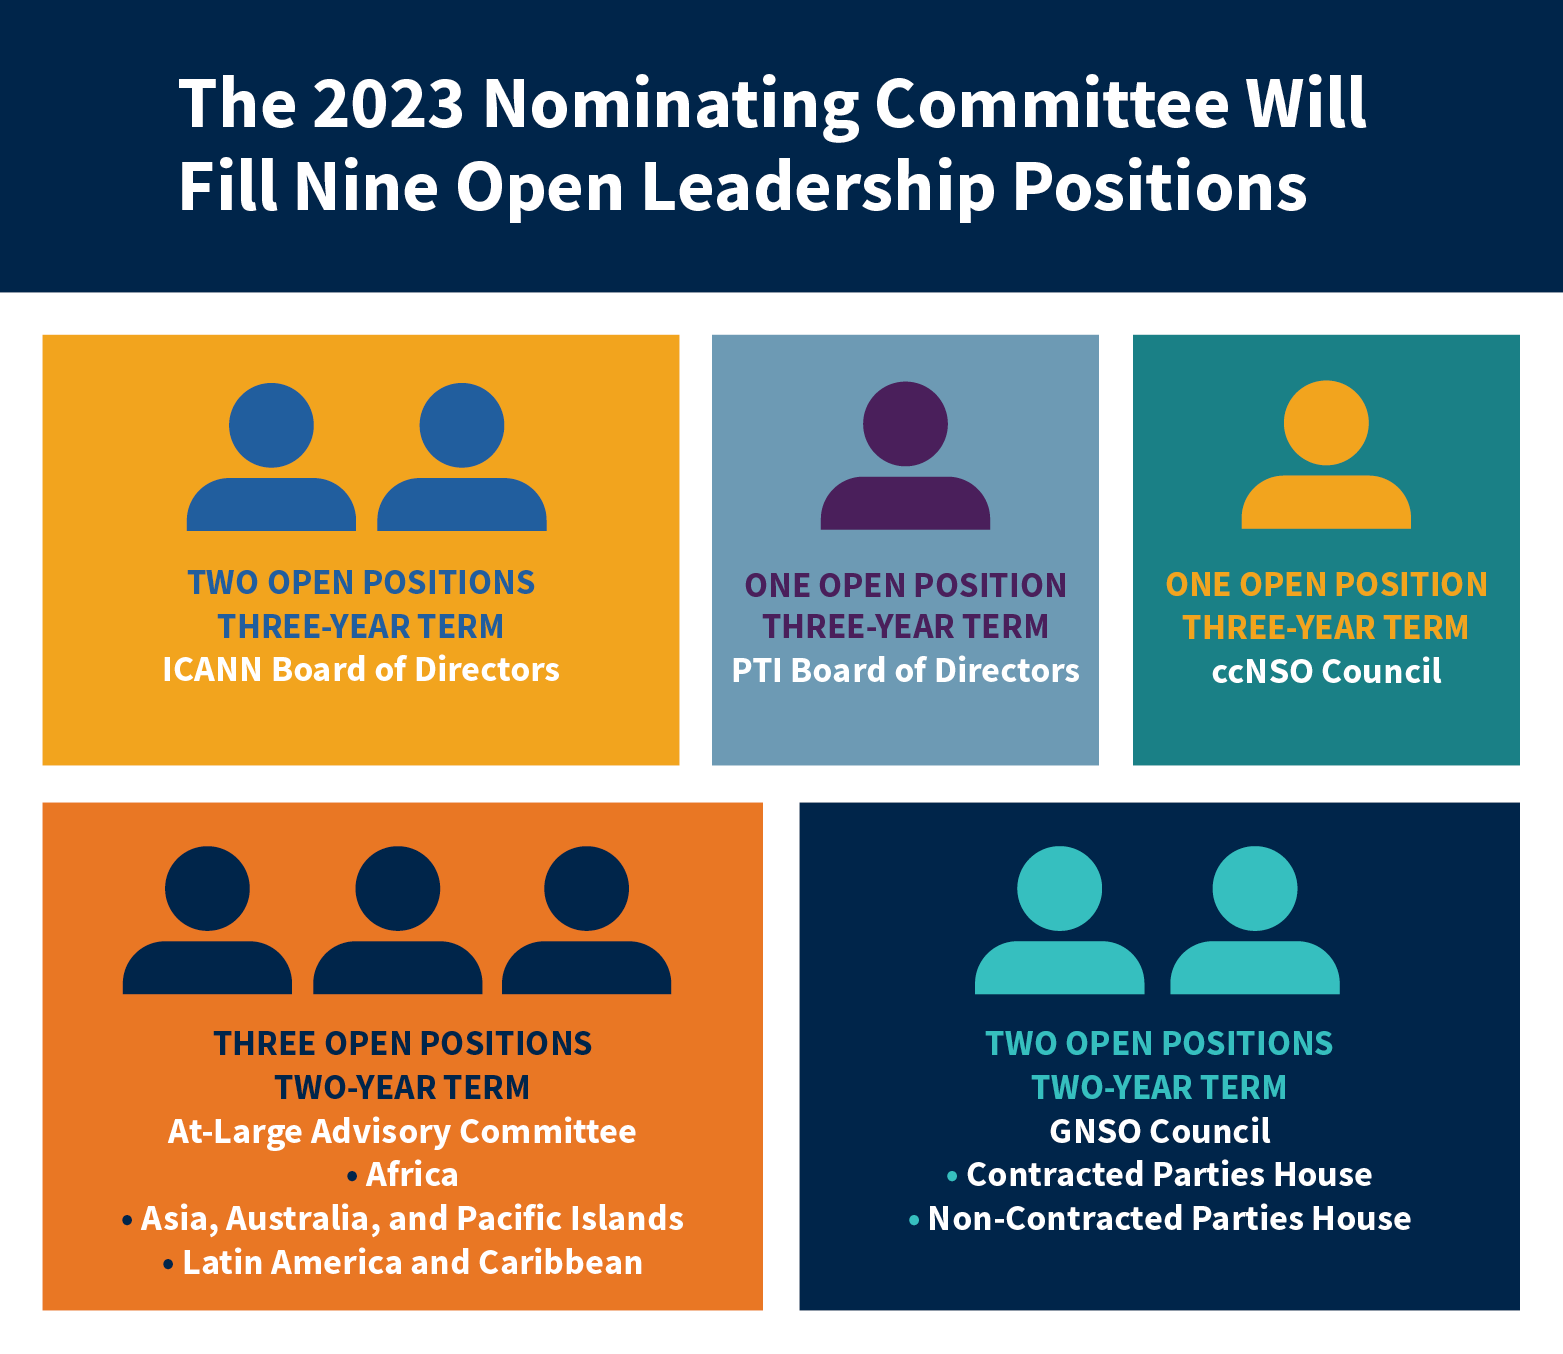 The 2023 Nominating Committee will fill nine open leadership positions.